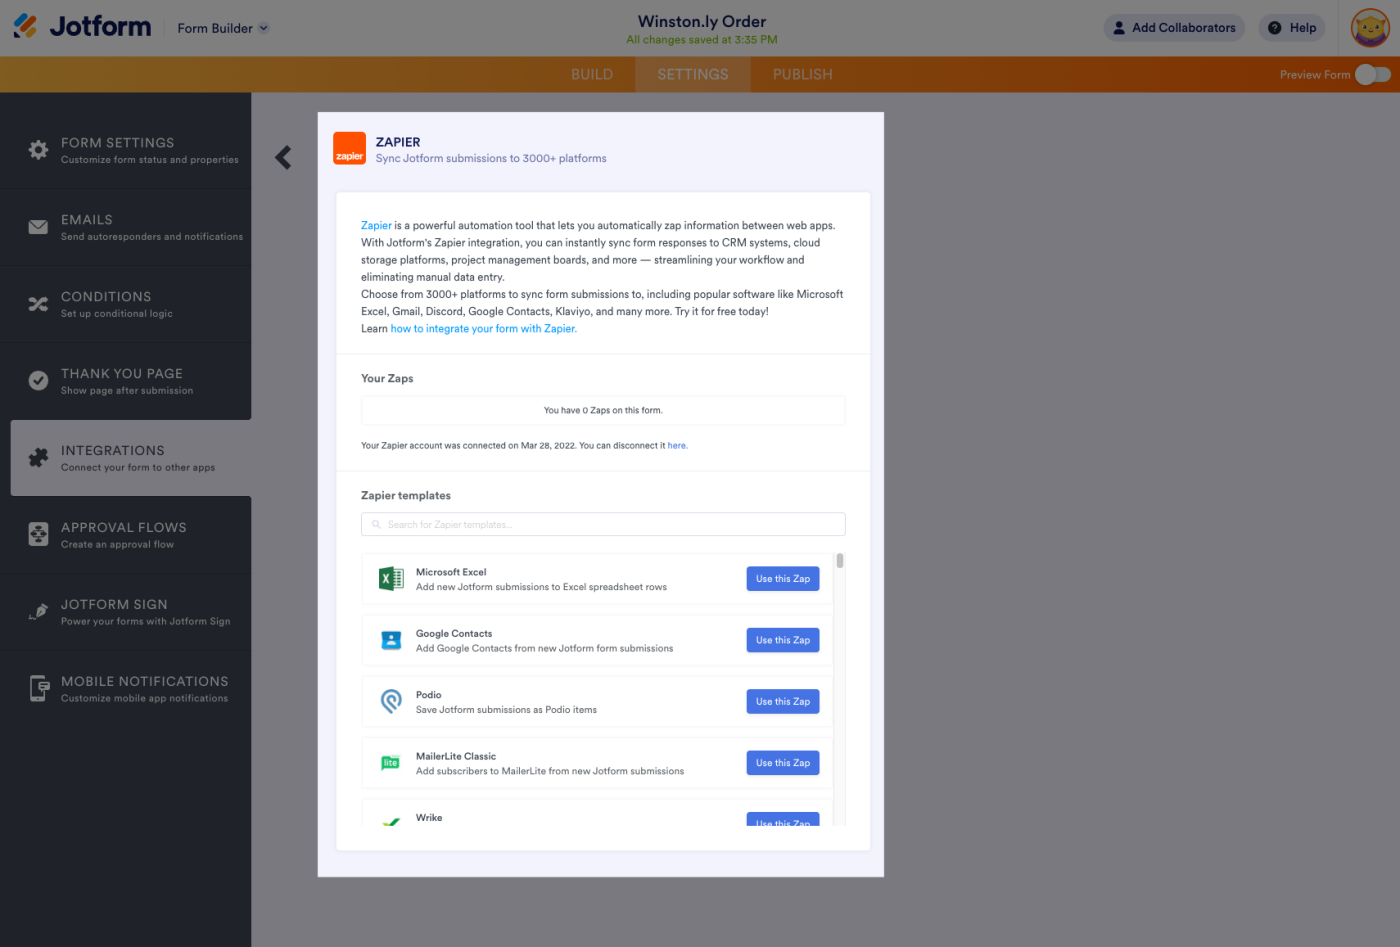 Once Jotform users click on Zapier from the integration tab of the form builder, the Zapier embed lets users connect their account, explore templates, and build Zaps.